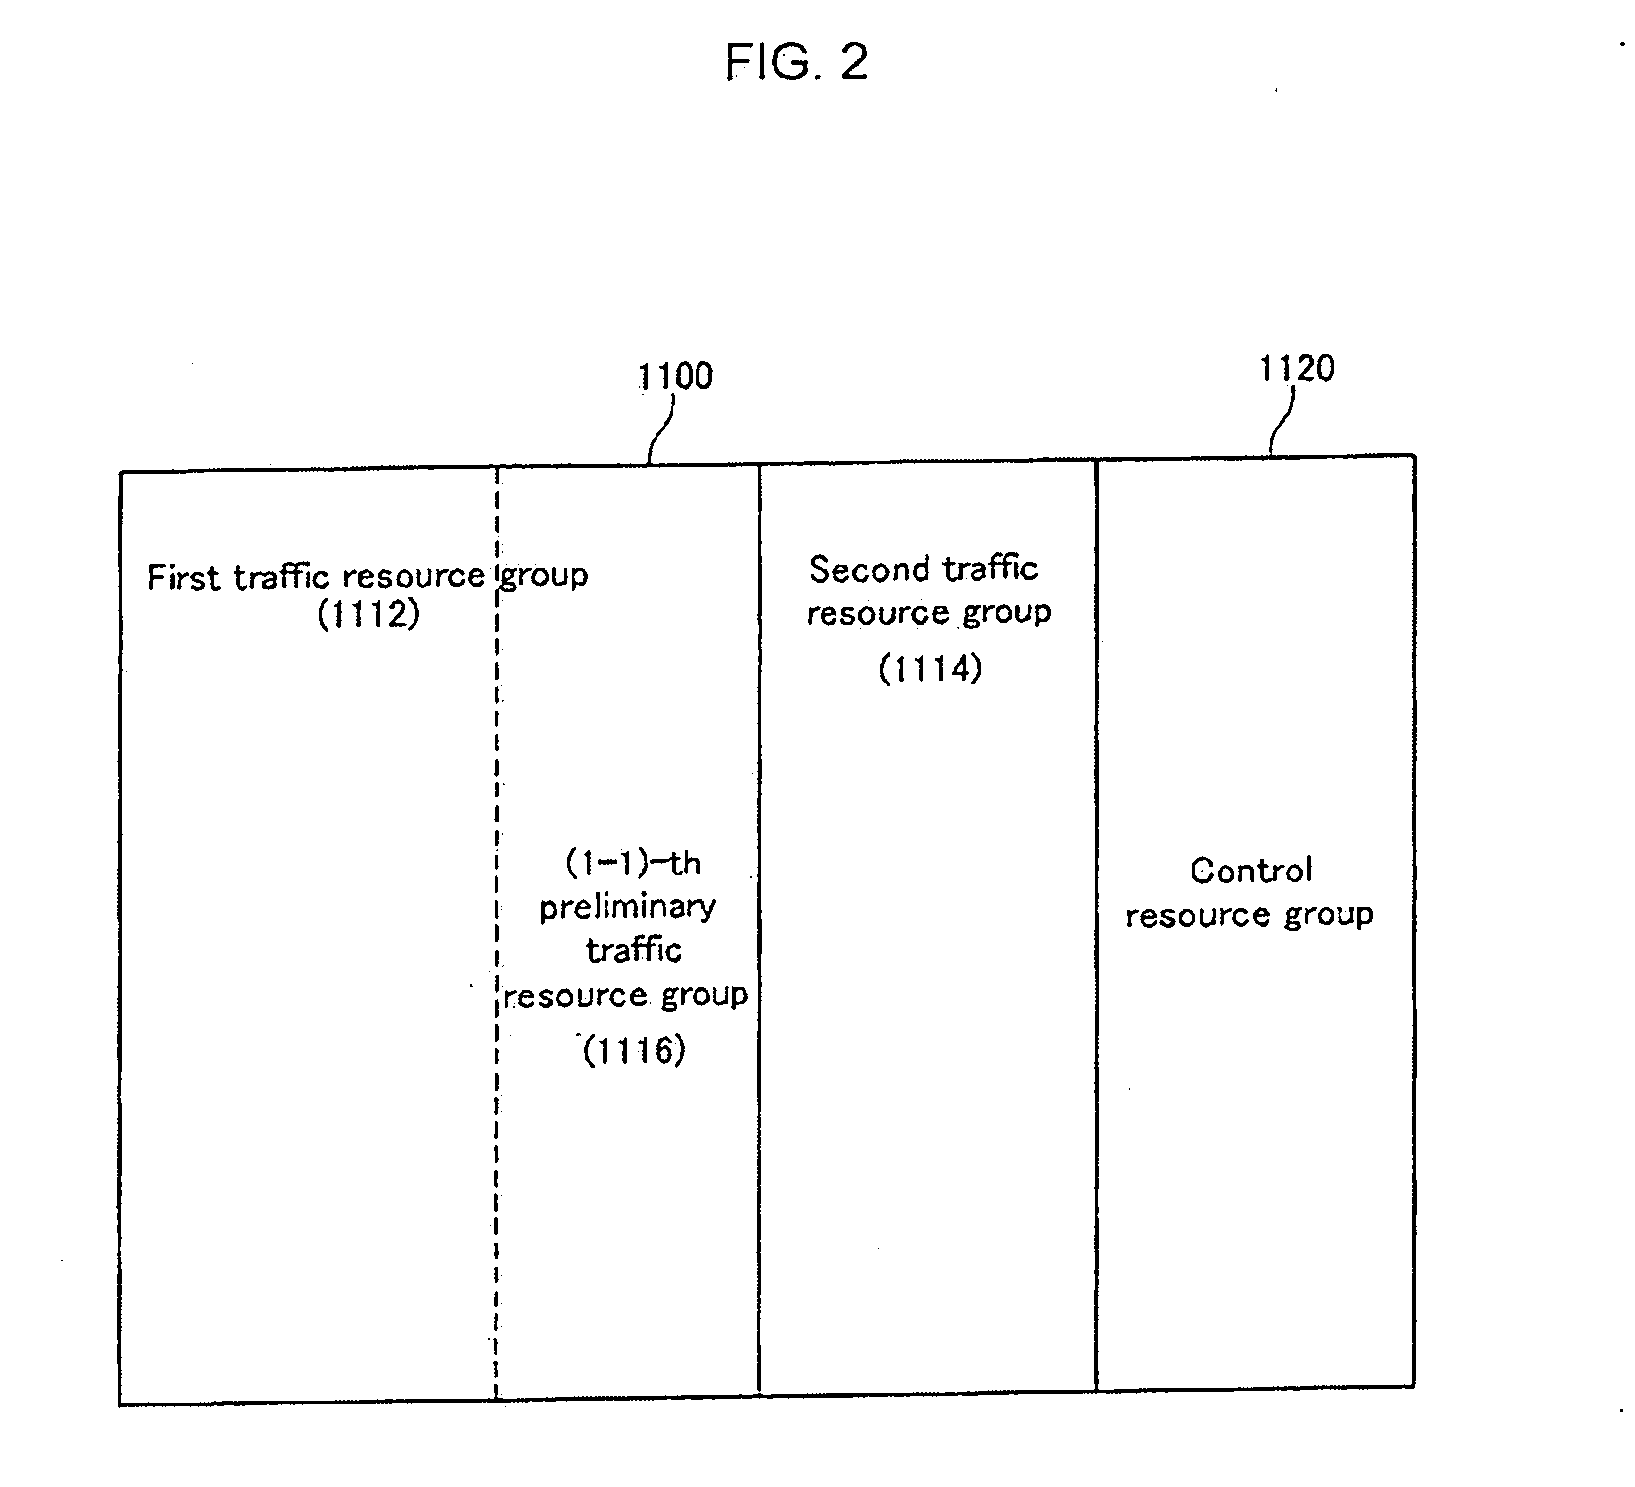 Method for resource partition, assignment, transmission and reception for inter-cell interference migration in downlink of OFDM cellular systems